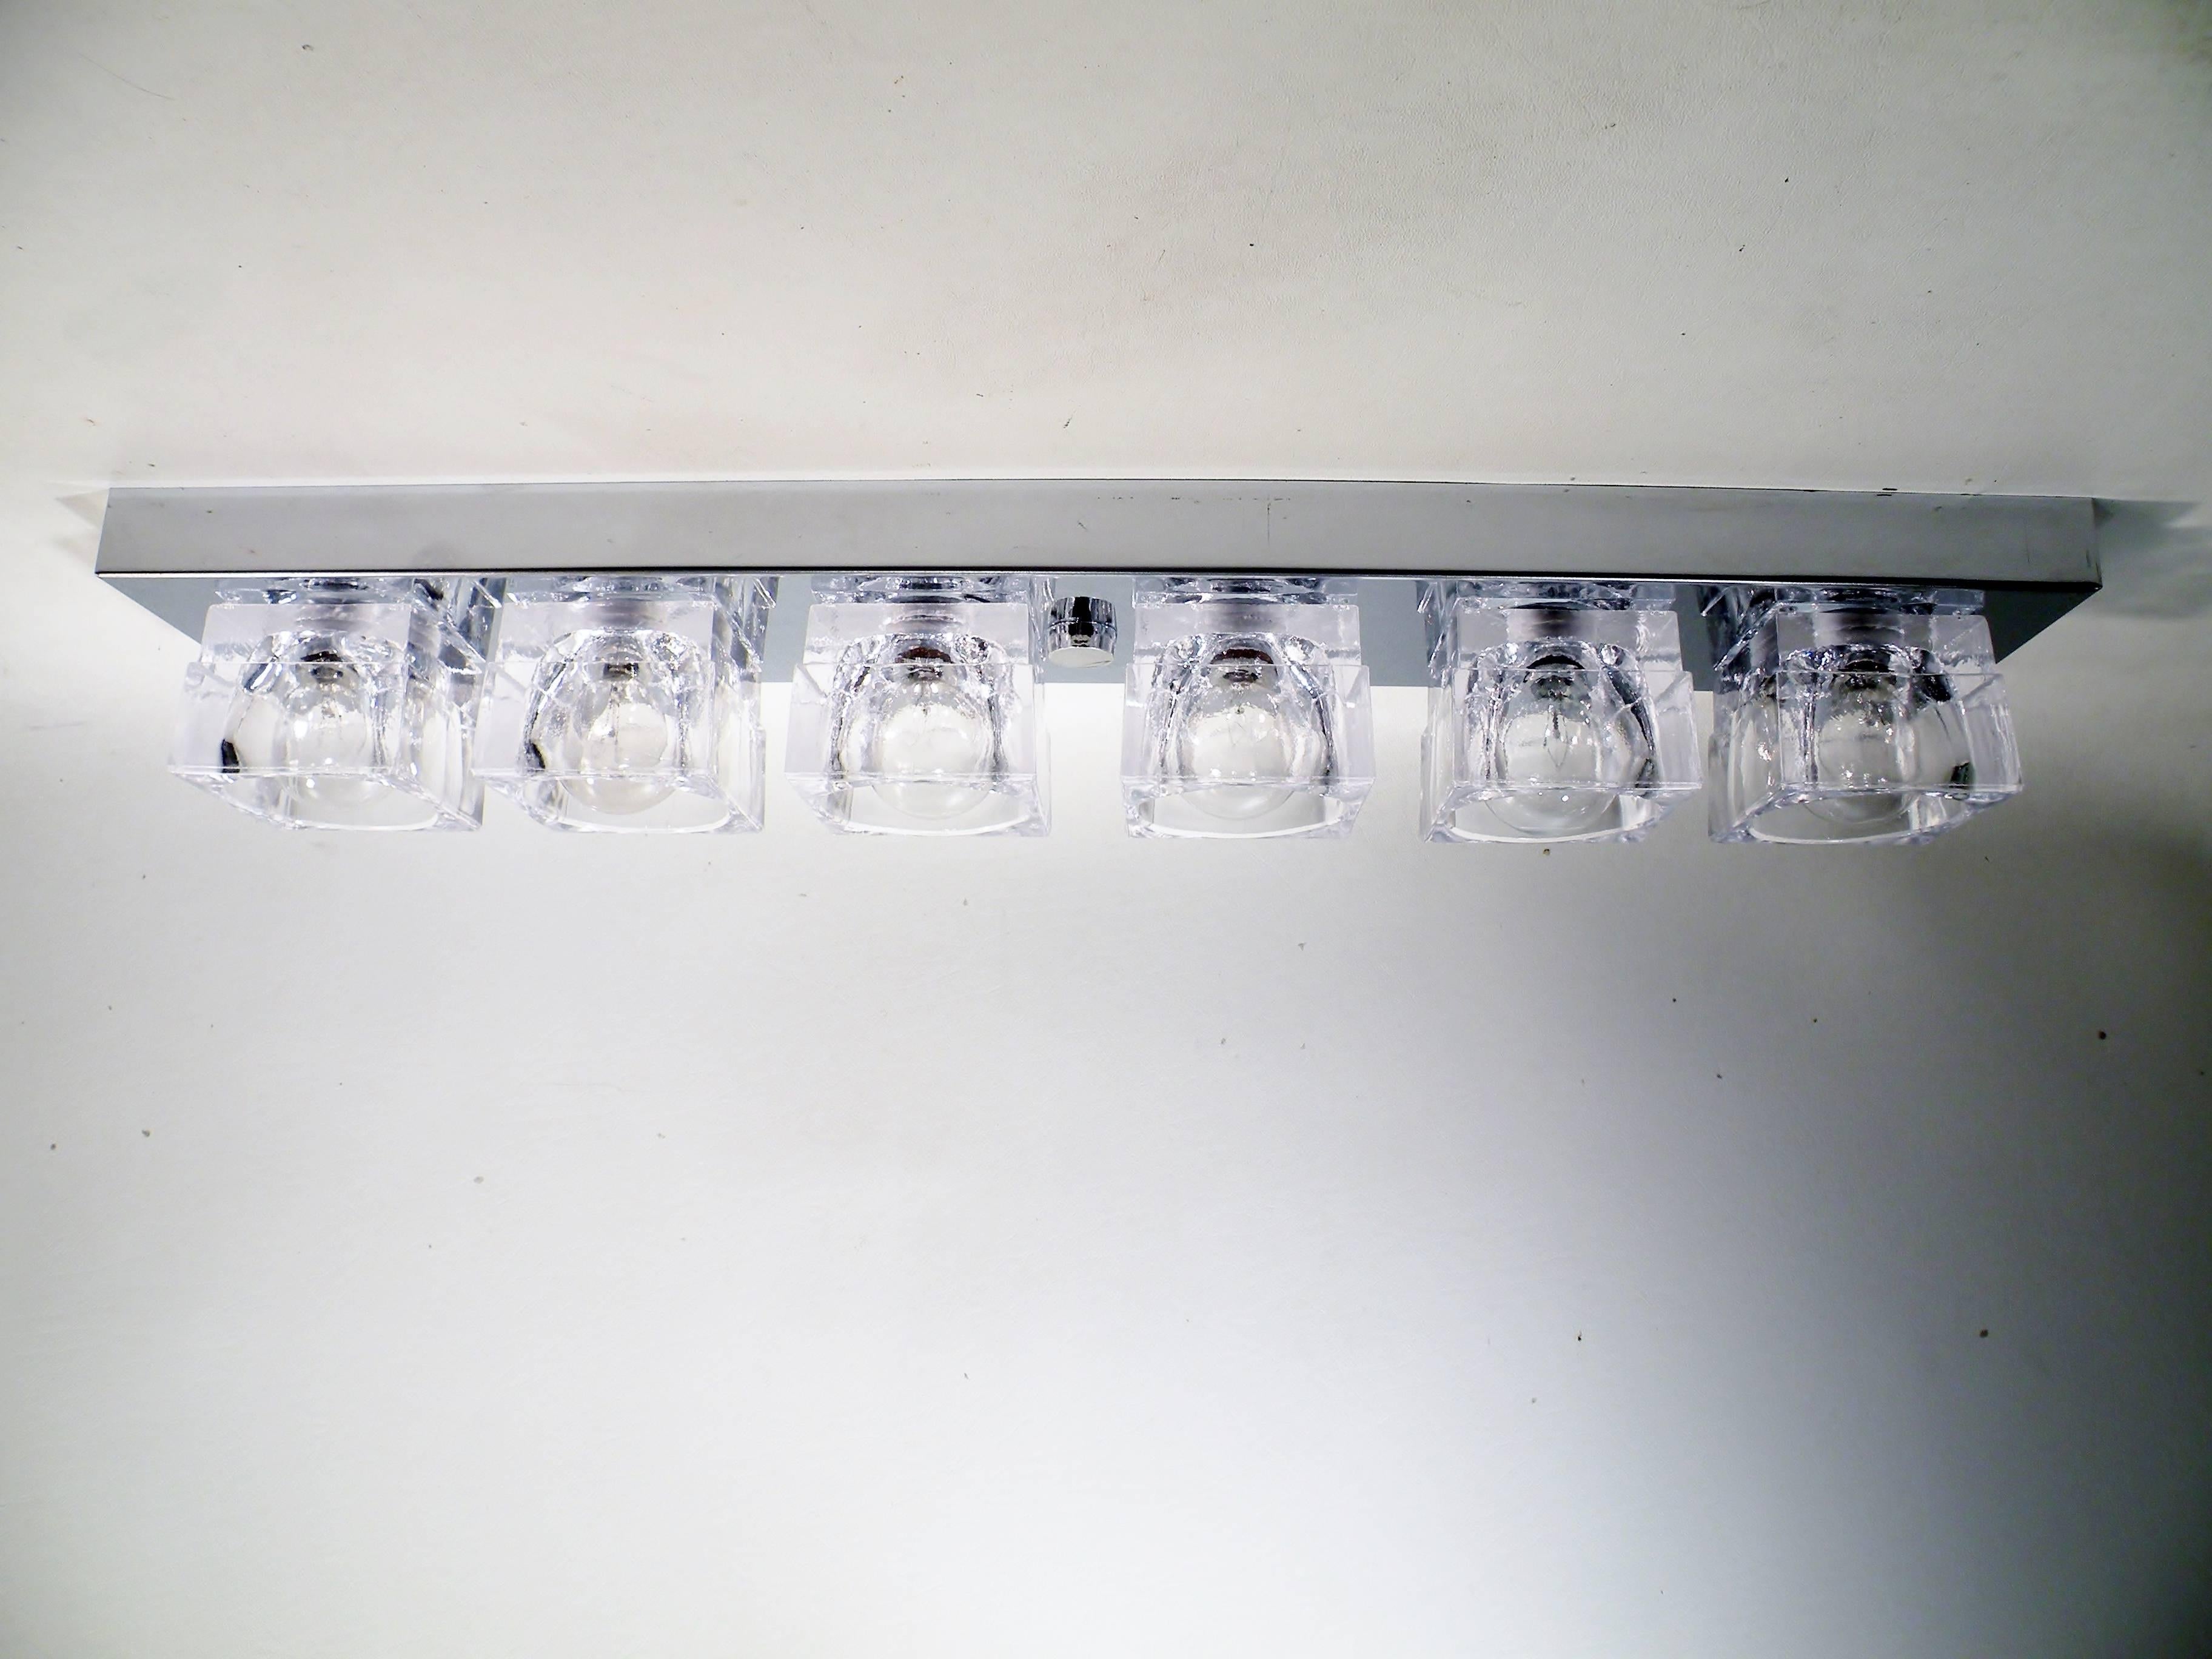 Flush mounted sconce or ceiling lamp by Gaetano Sciolari, dating to the 1960s. This original example has six square crystal cubes on chrome-plated steel strip mounting plate. Price listed is per sconce. Can be hung vertically or horizontally, at